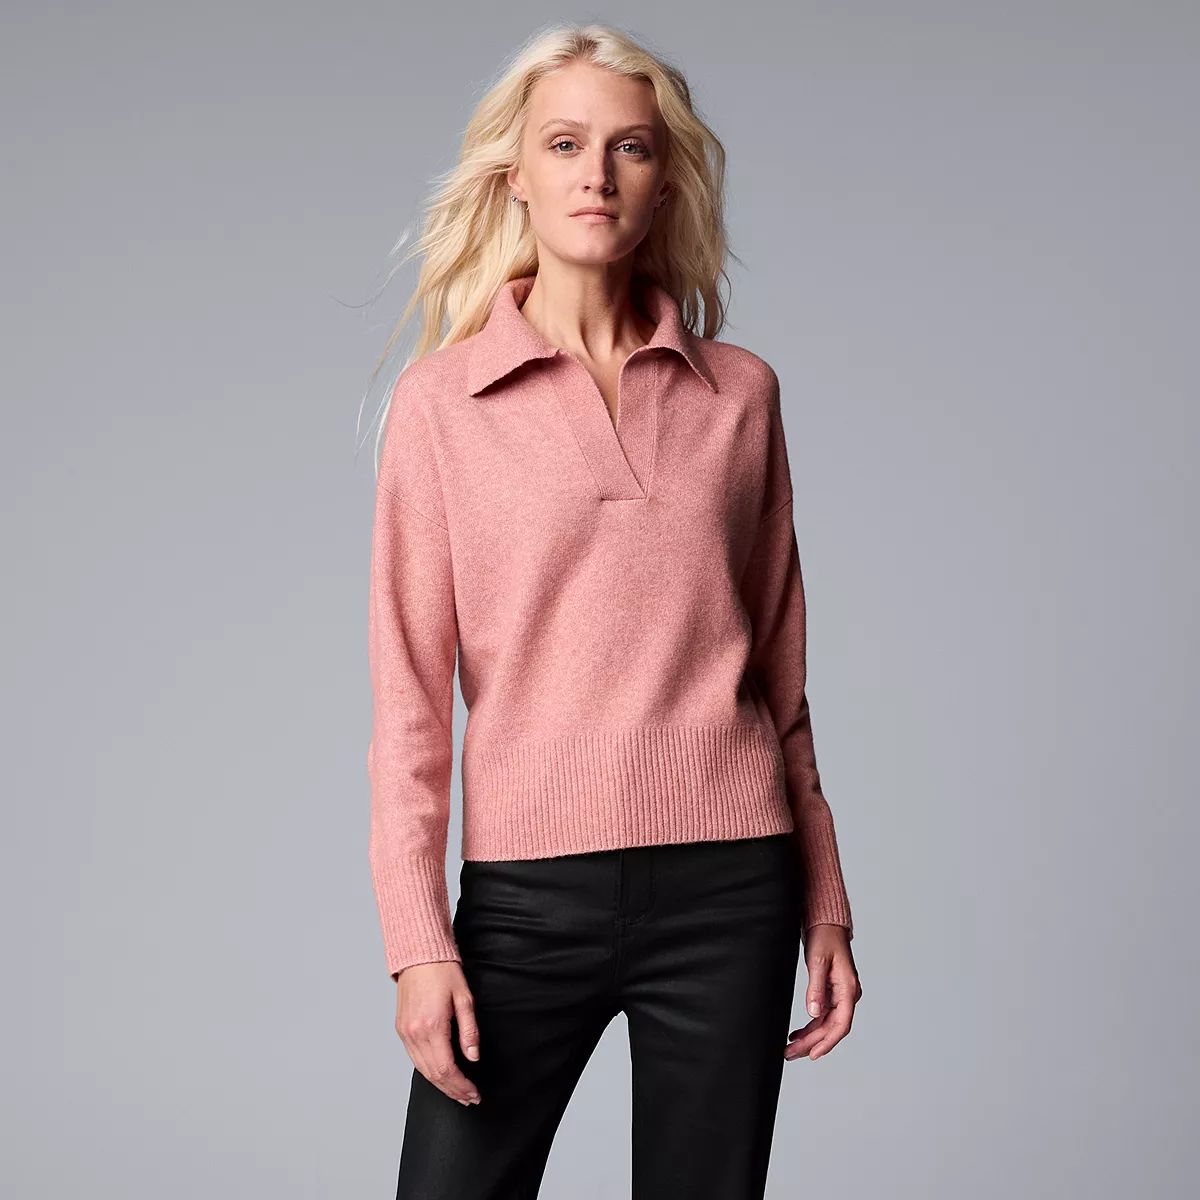 Women's Simply Vera Vera Wang Luxe Cashmere Blend Pullover | Kohl's